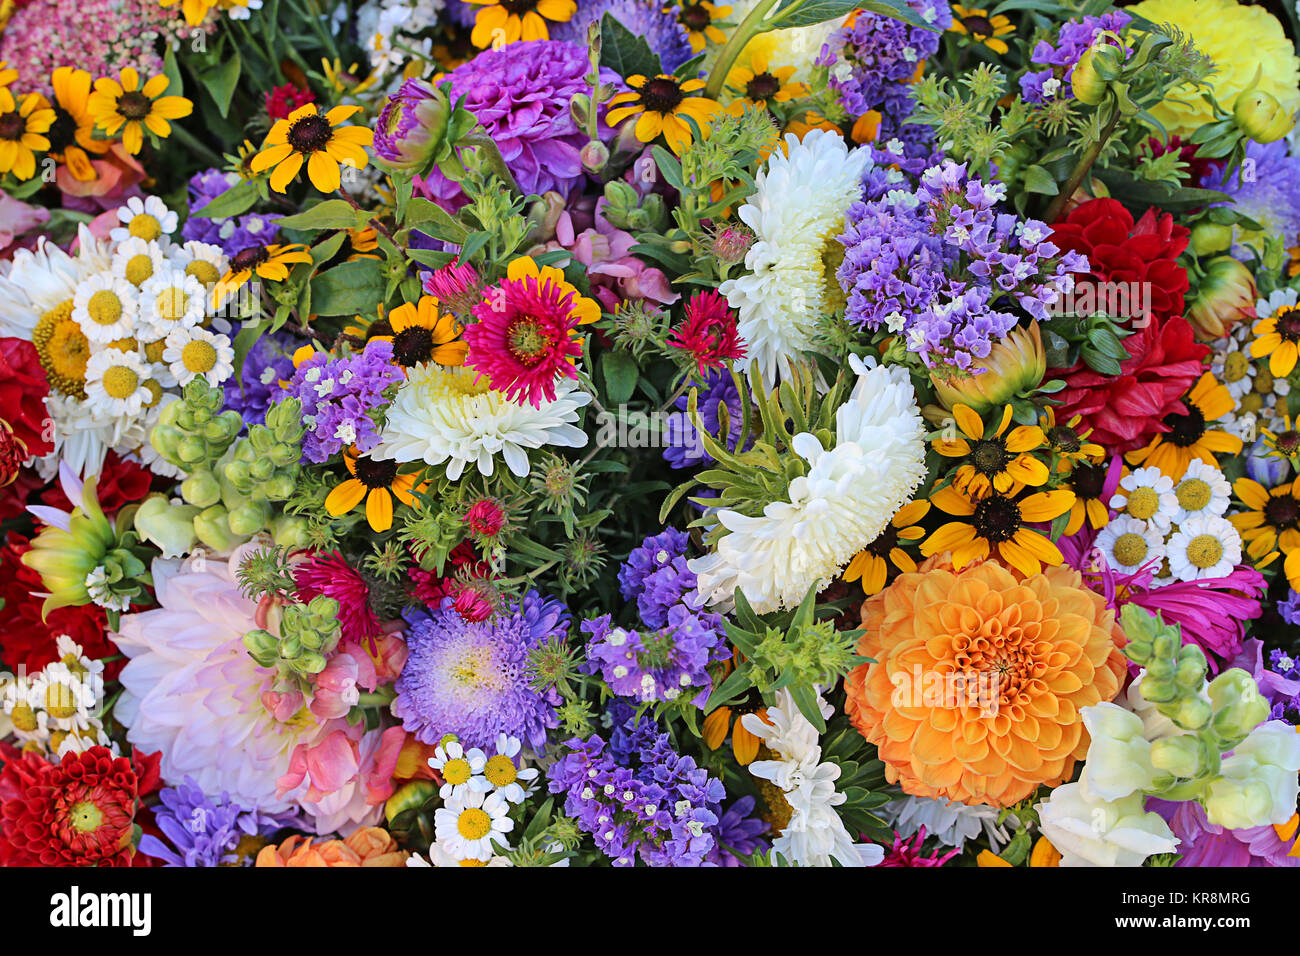 colorful bouquet with summer flowers Stock Photo